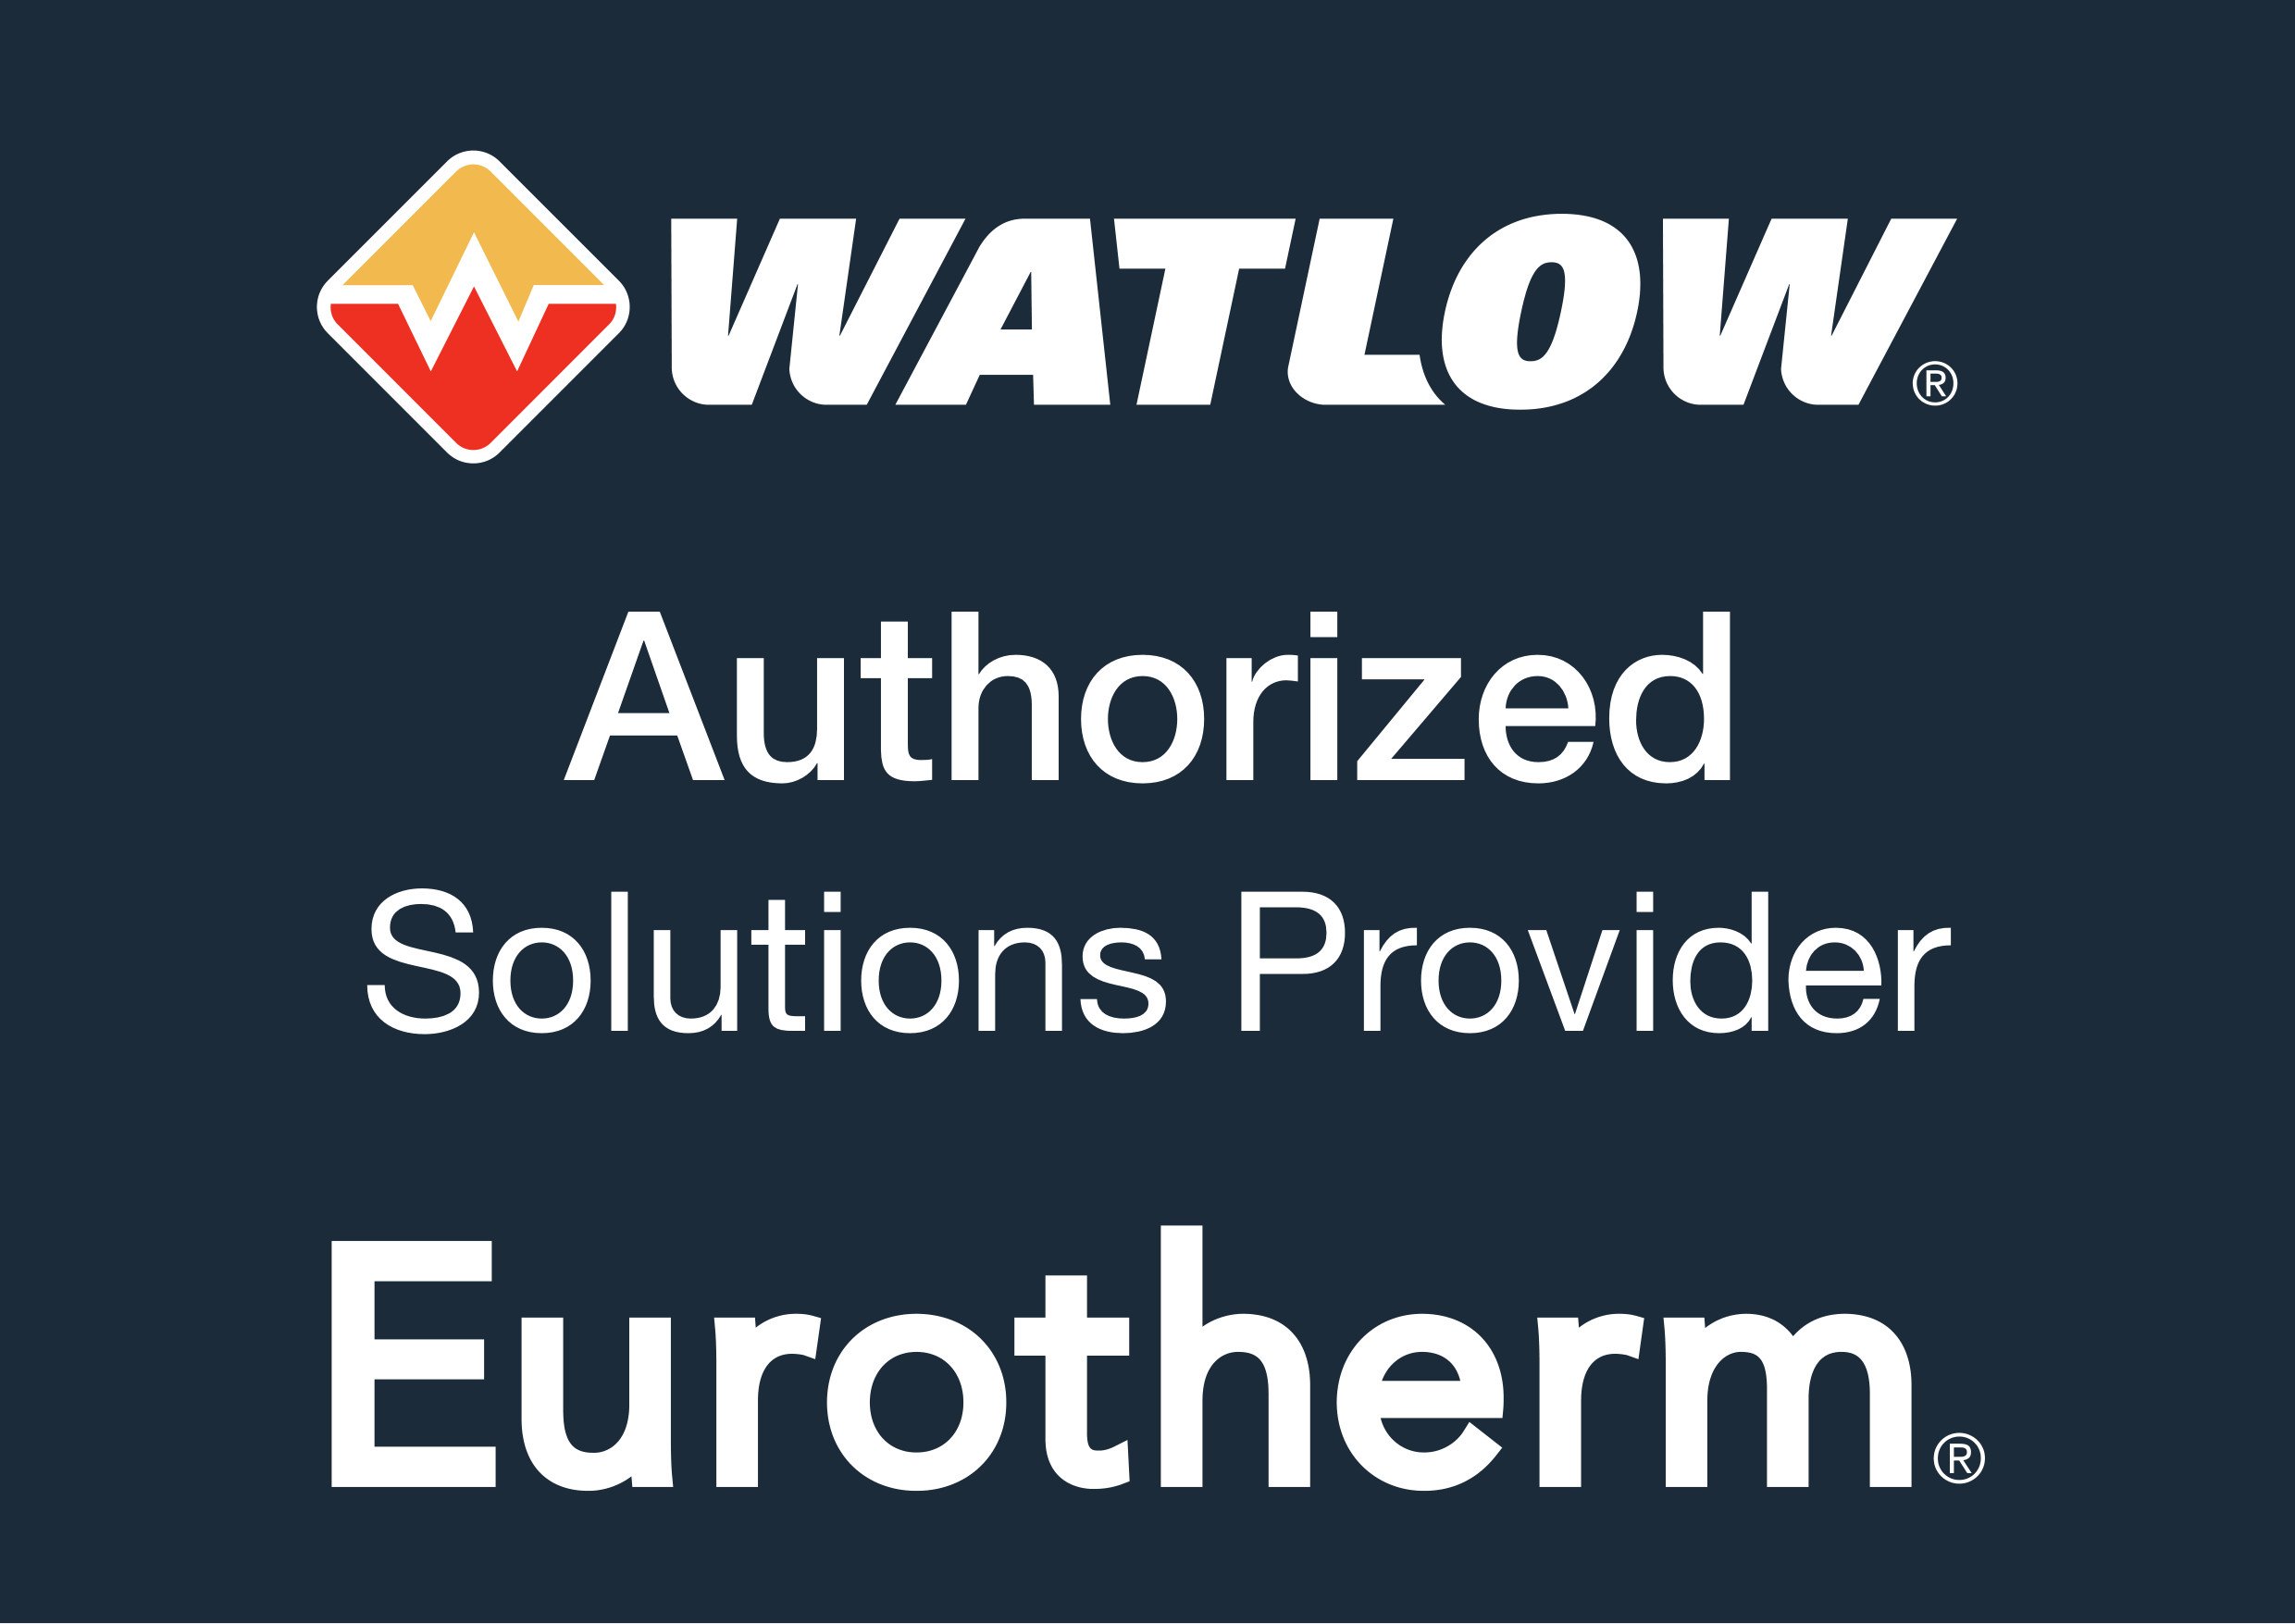 Eurotherm Partner Badges_Authorized Solutions Provider_Grey